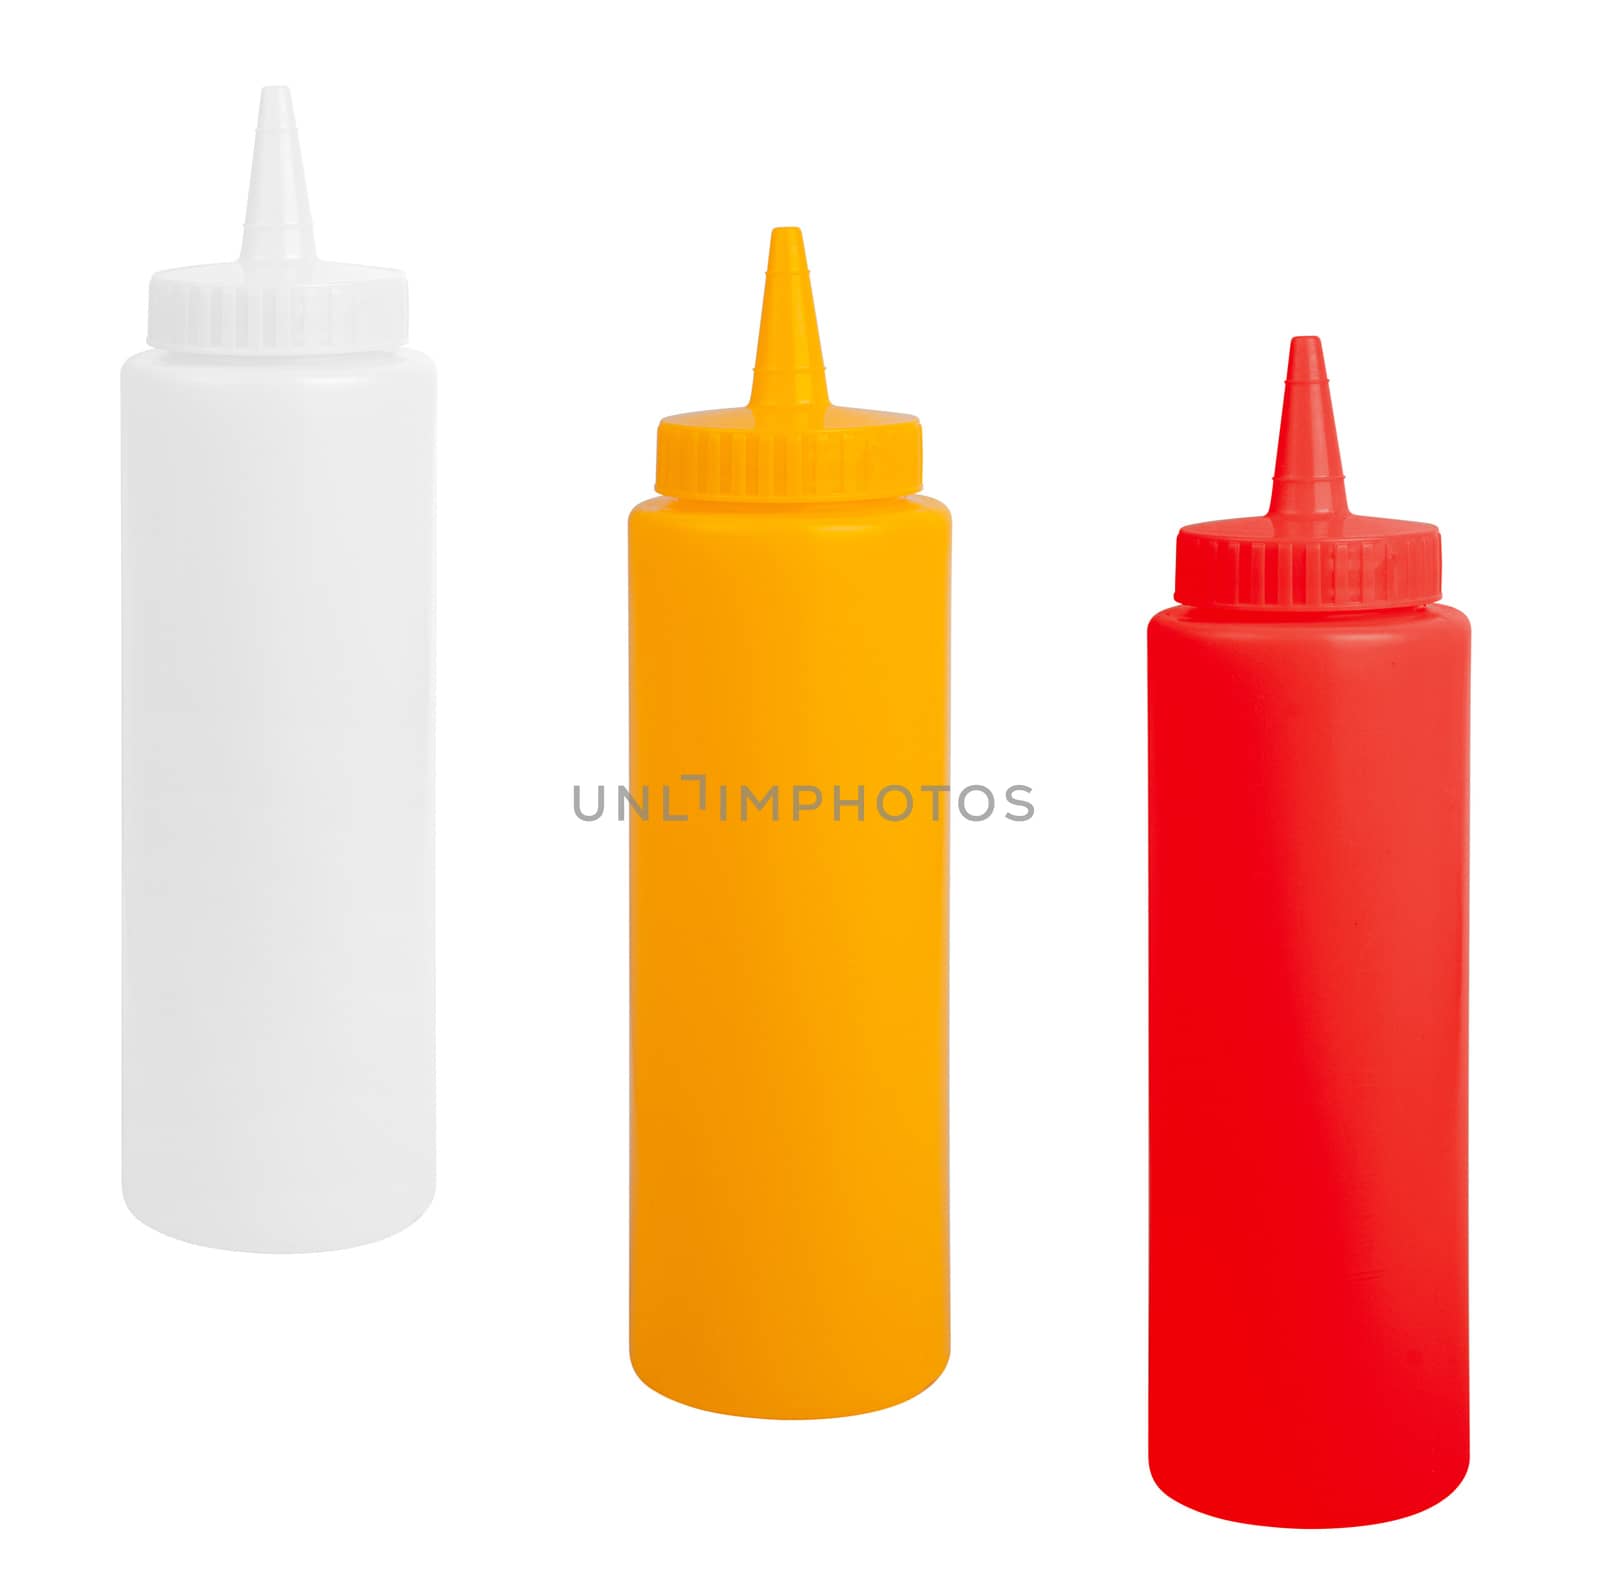 bottles of mustard and ketchup against white background